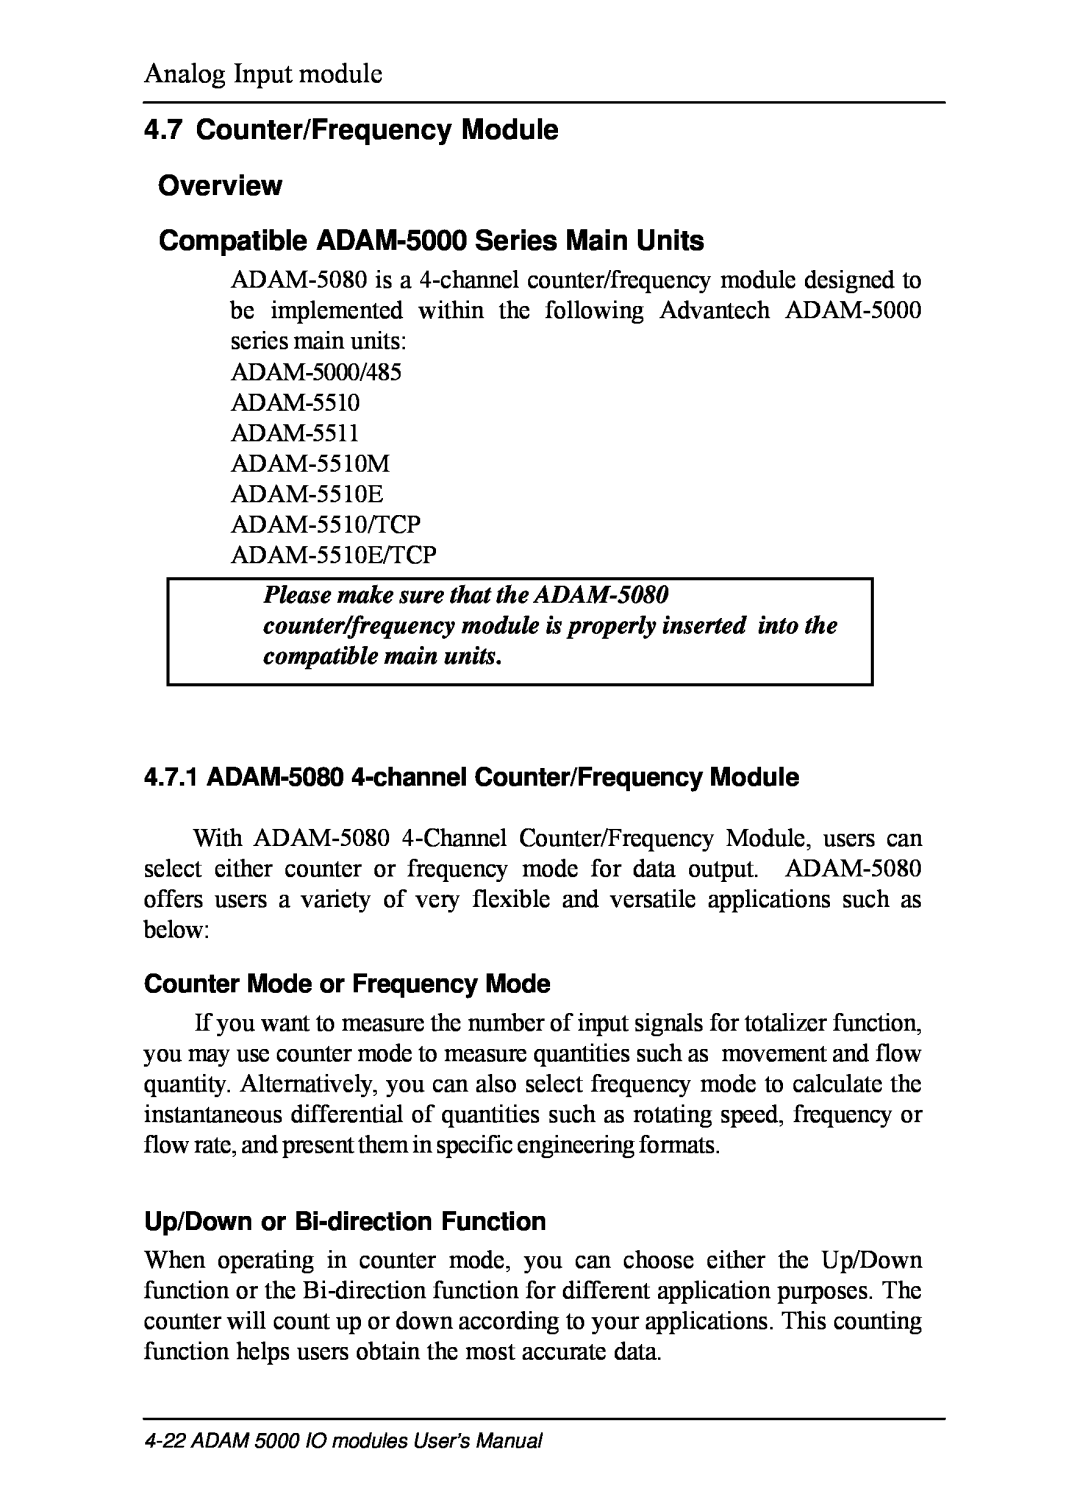 B&B Electronics Counter/Frequency Module Overview, Compatible ADAM-5000 Series Main Units, Analog Input module 